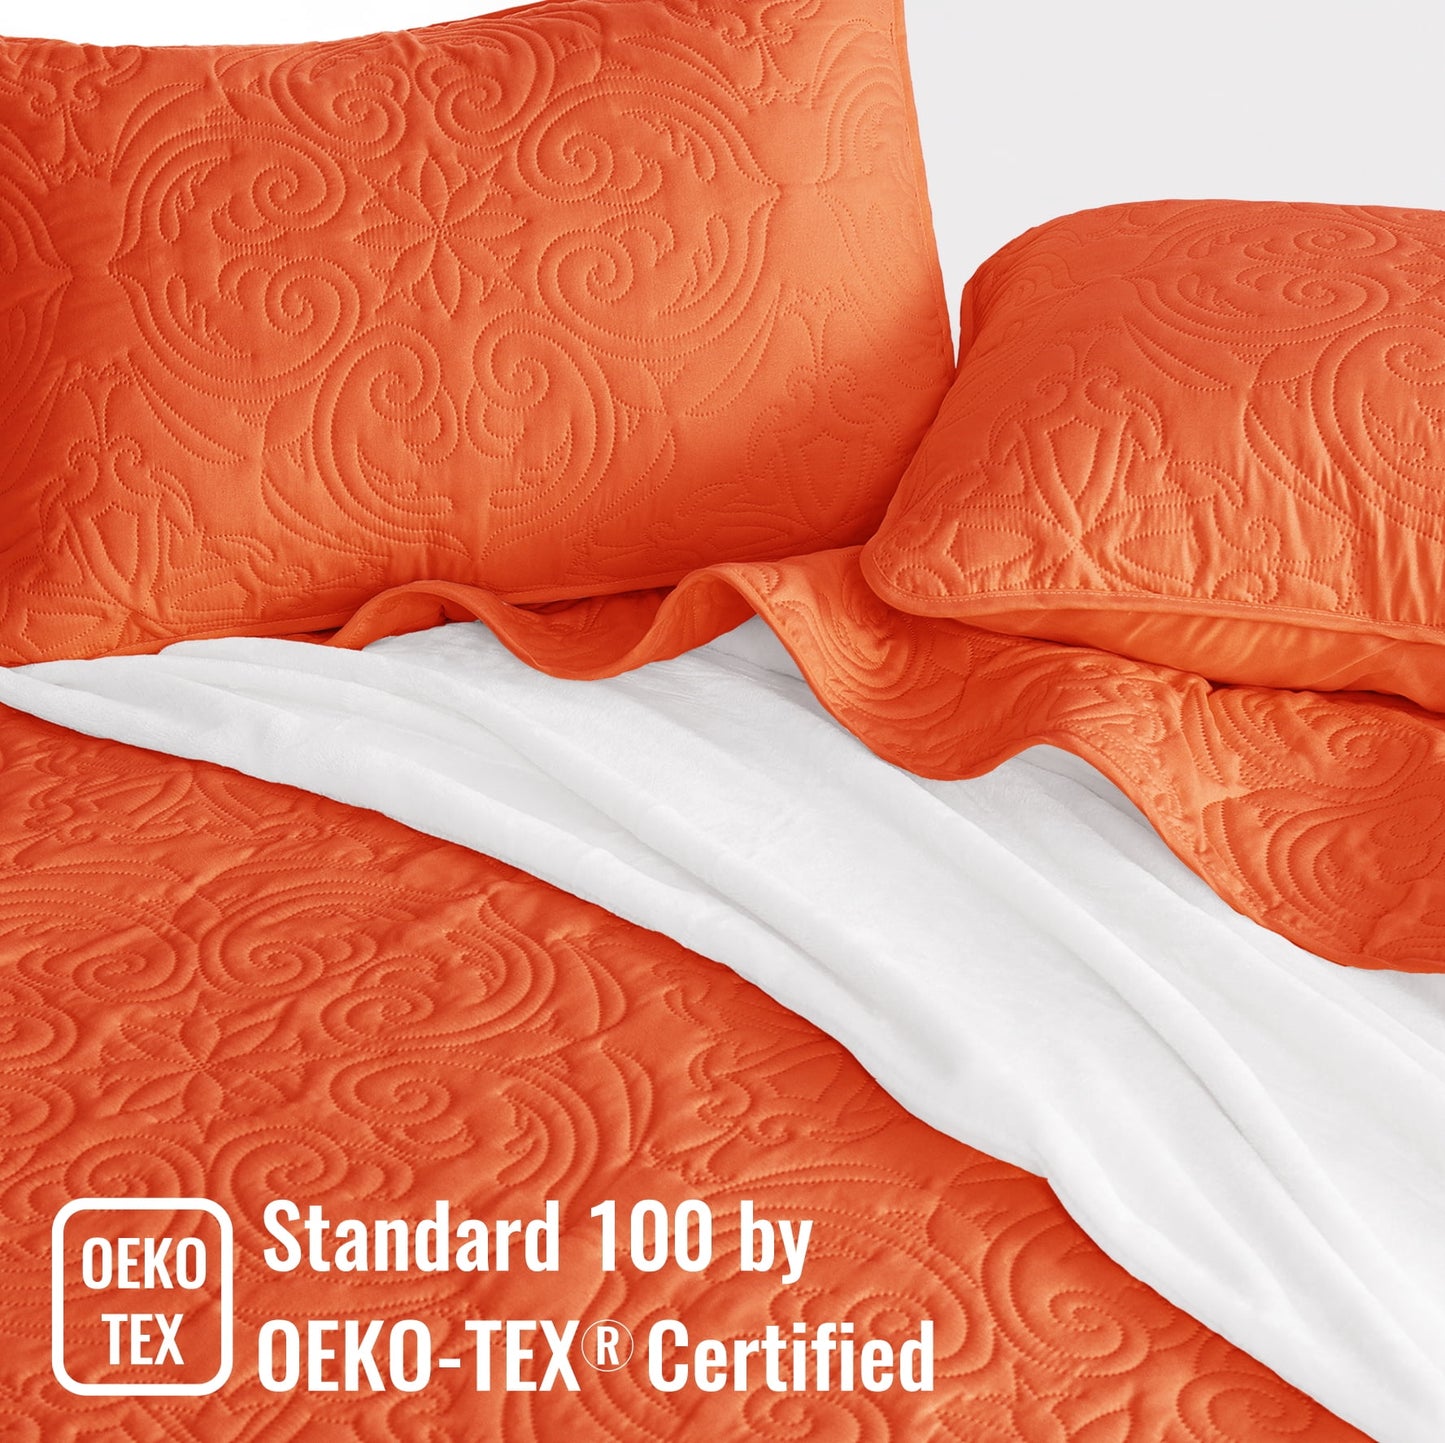 Exclusivo Mezcla King Quilt Bedding Set, Lightweight Vintage King Size Quilts with Pillow Shams, Soft Bedspreads Coverlets for All Seasons, (104"x96", Orange)